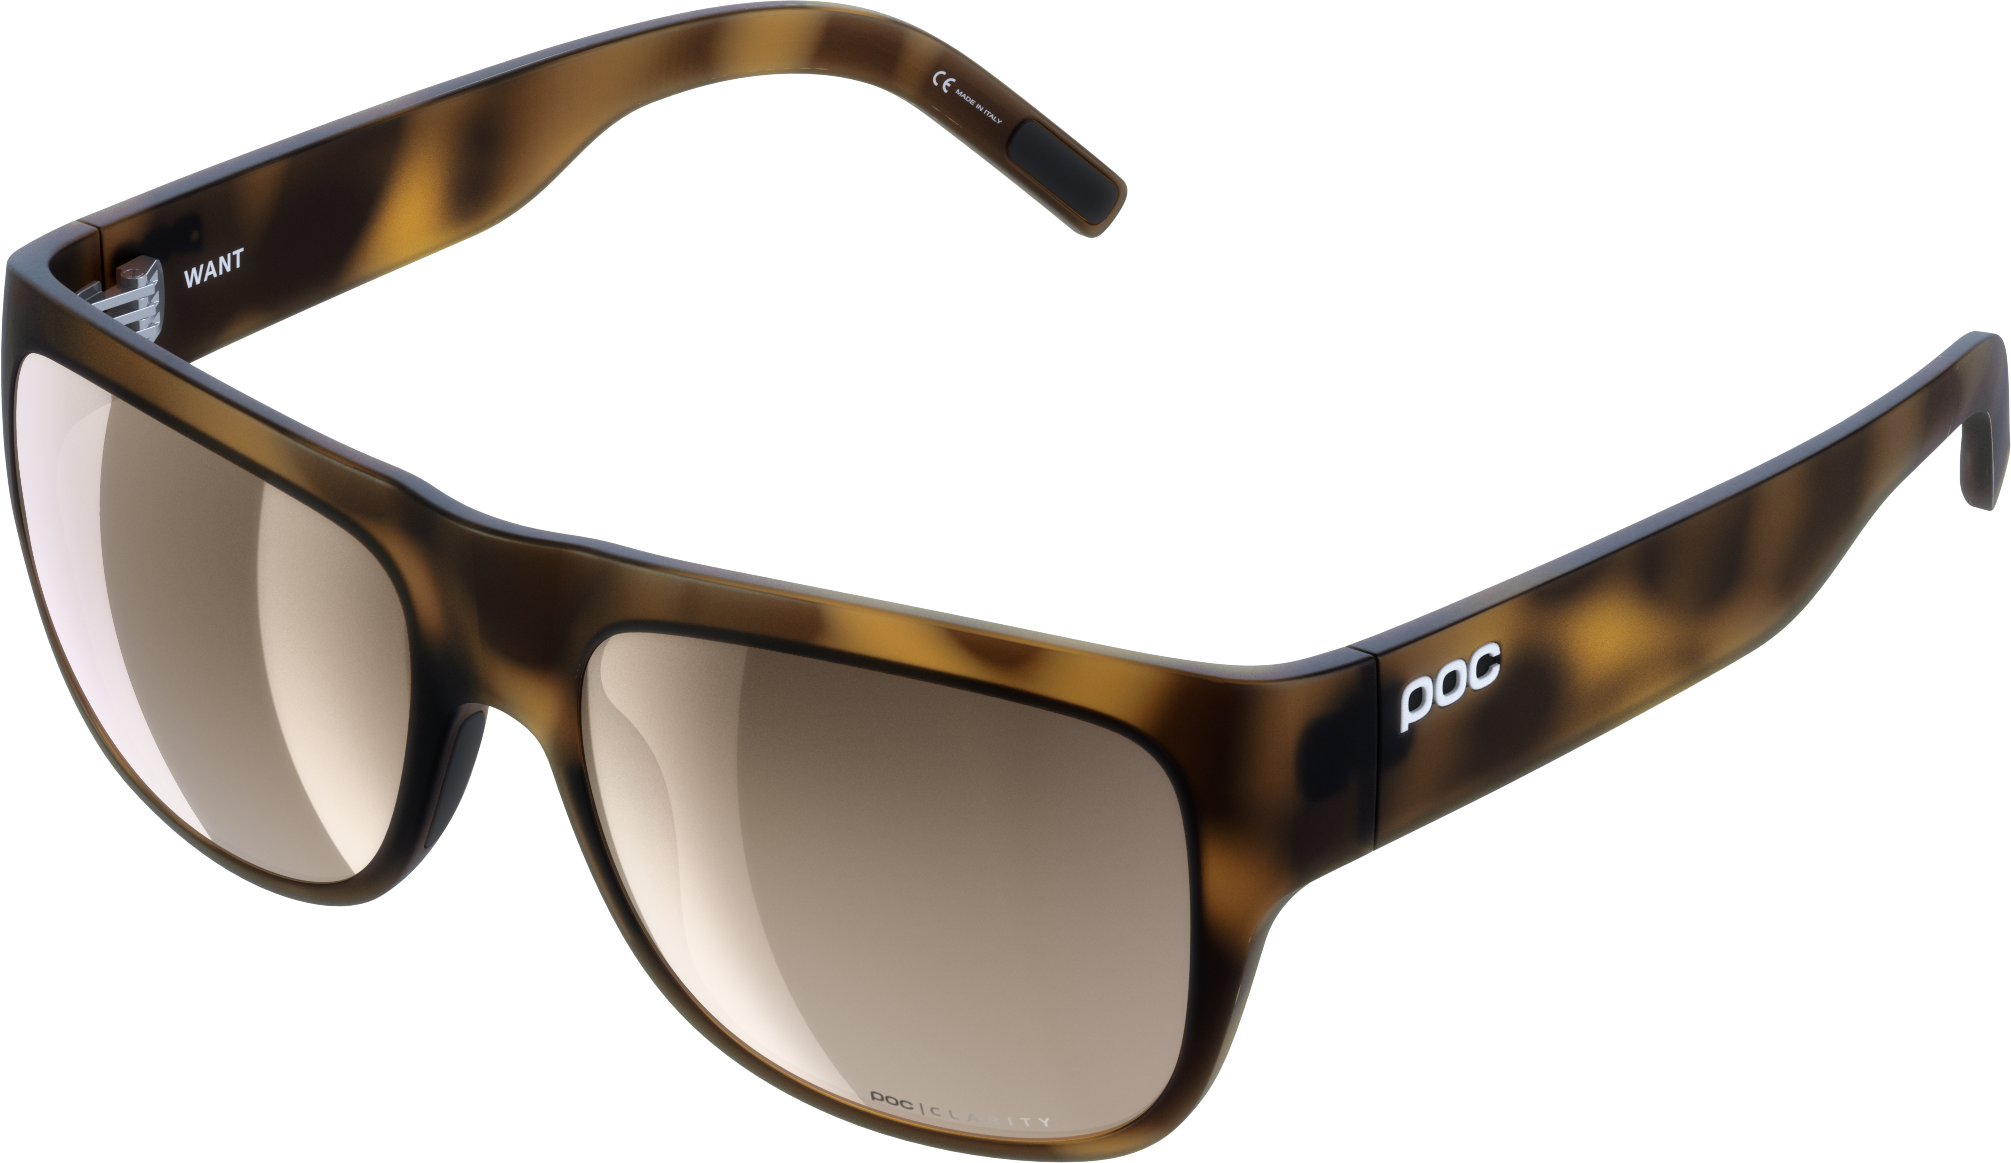 POC Want Tortoise Brown/Clarity Trail Partly Sunny Silver